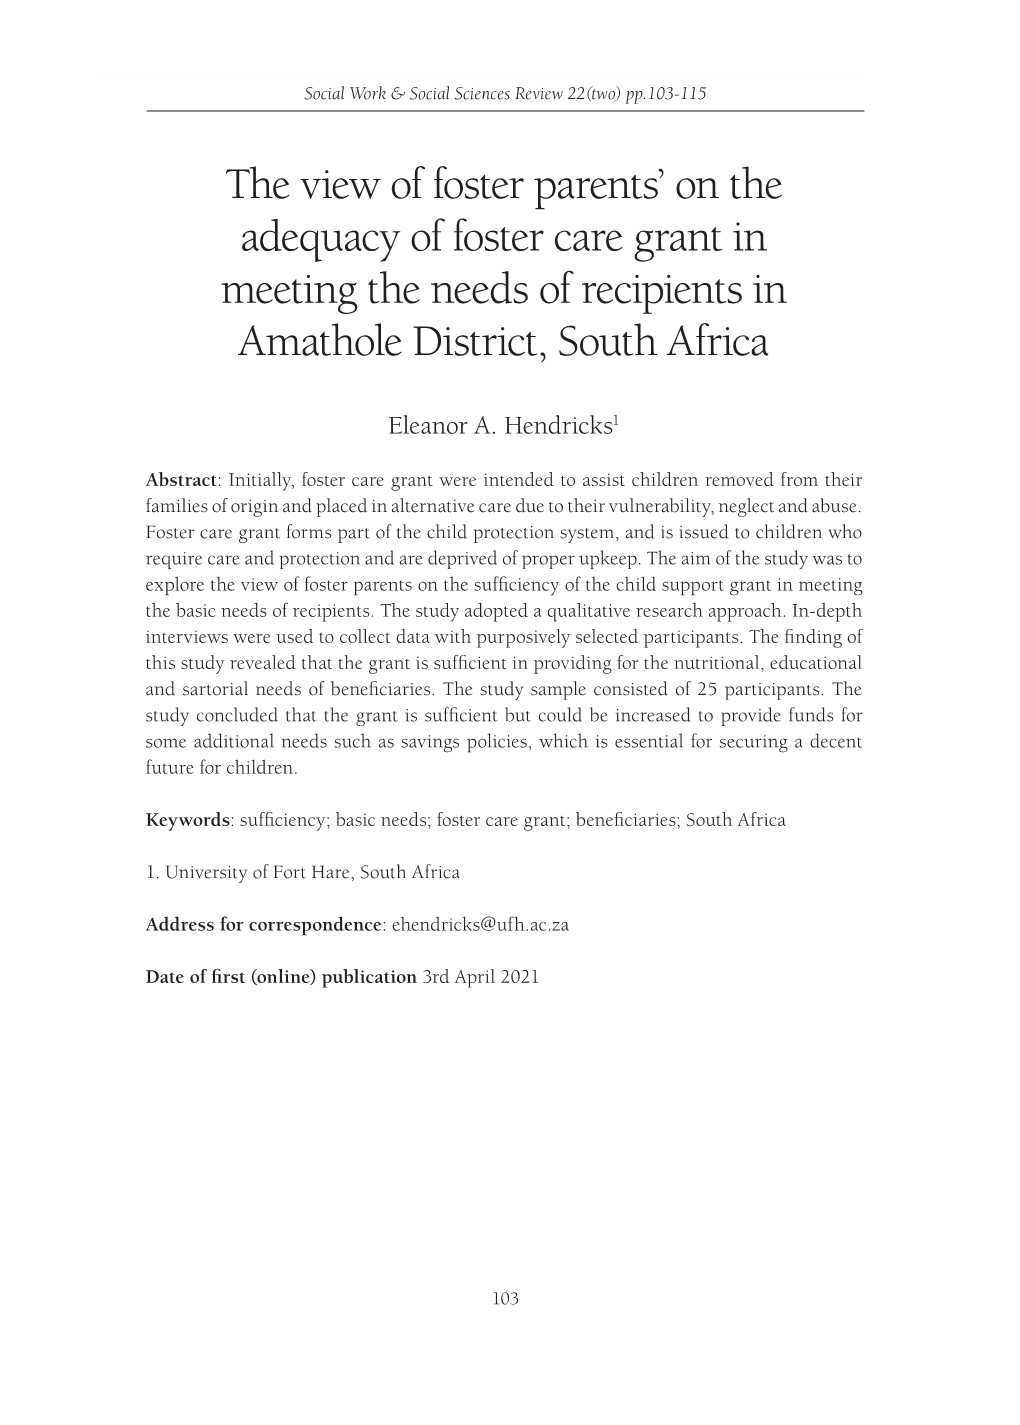 The View of Foster Parents' on the Adequacy of Foster Care Grant In